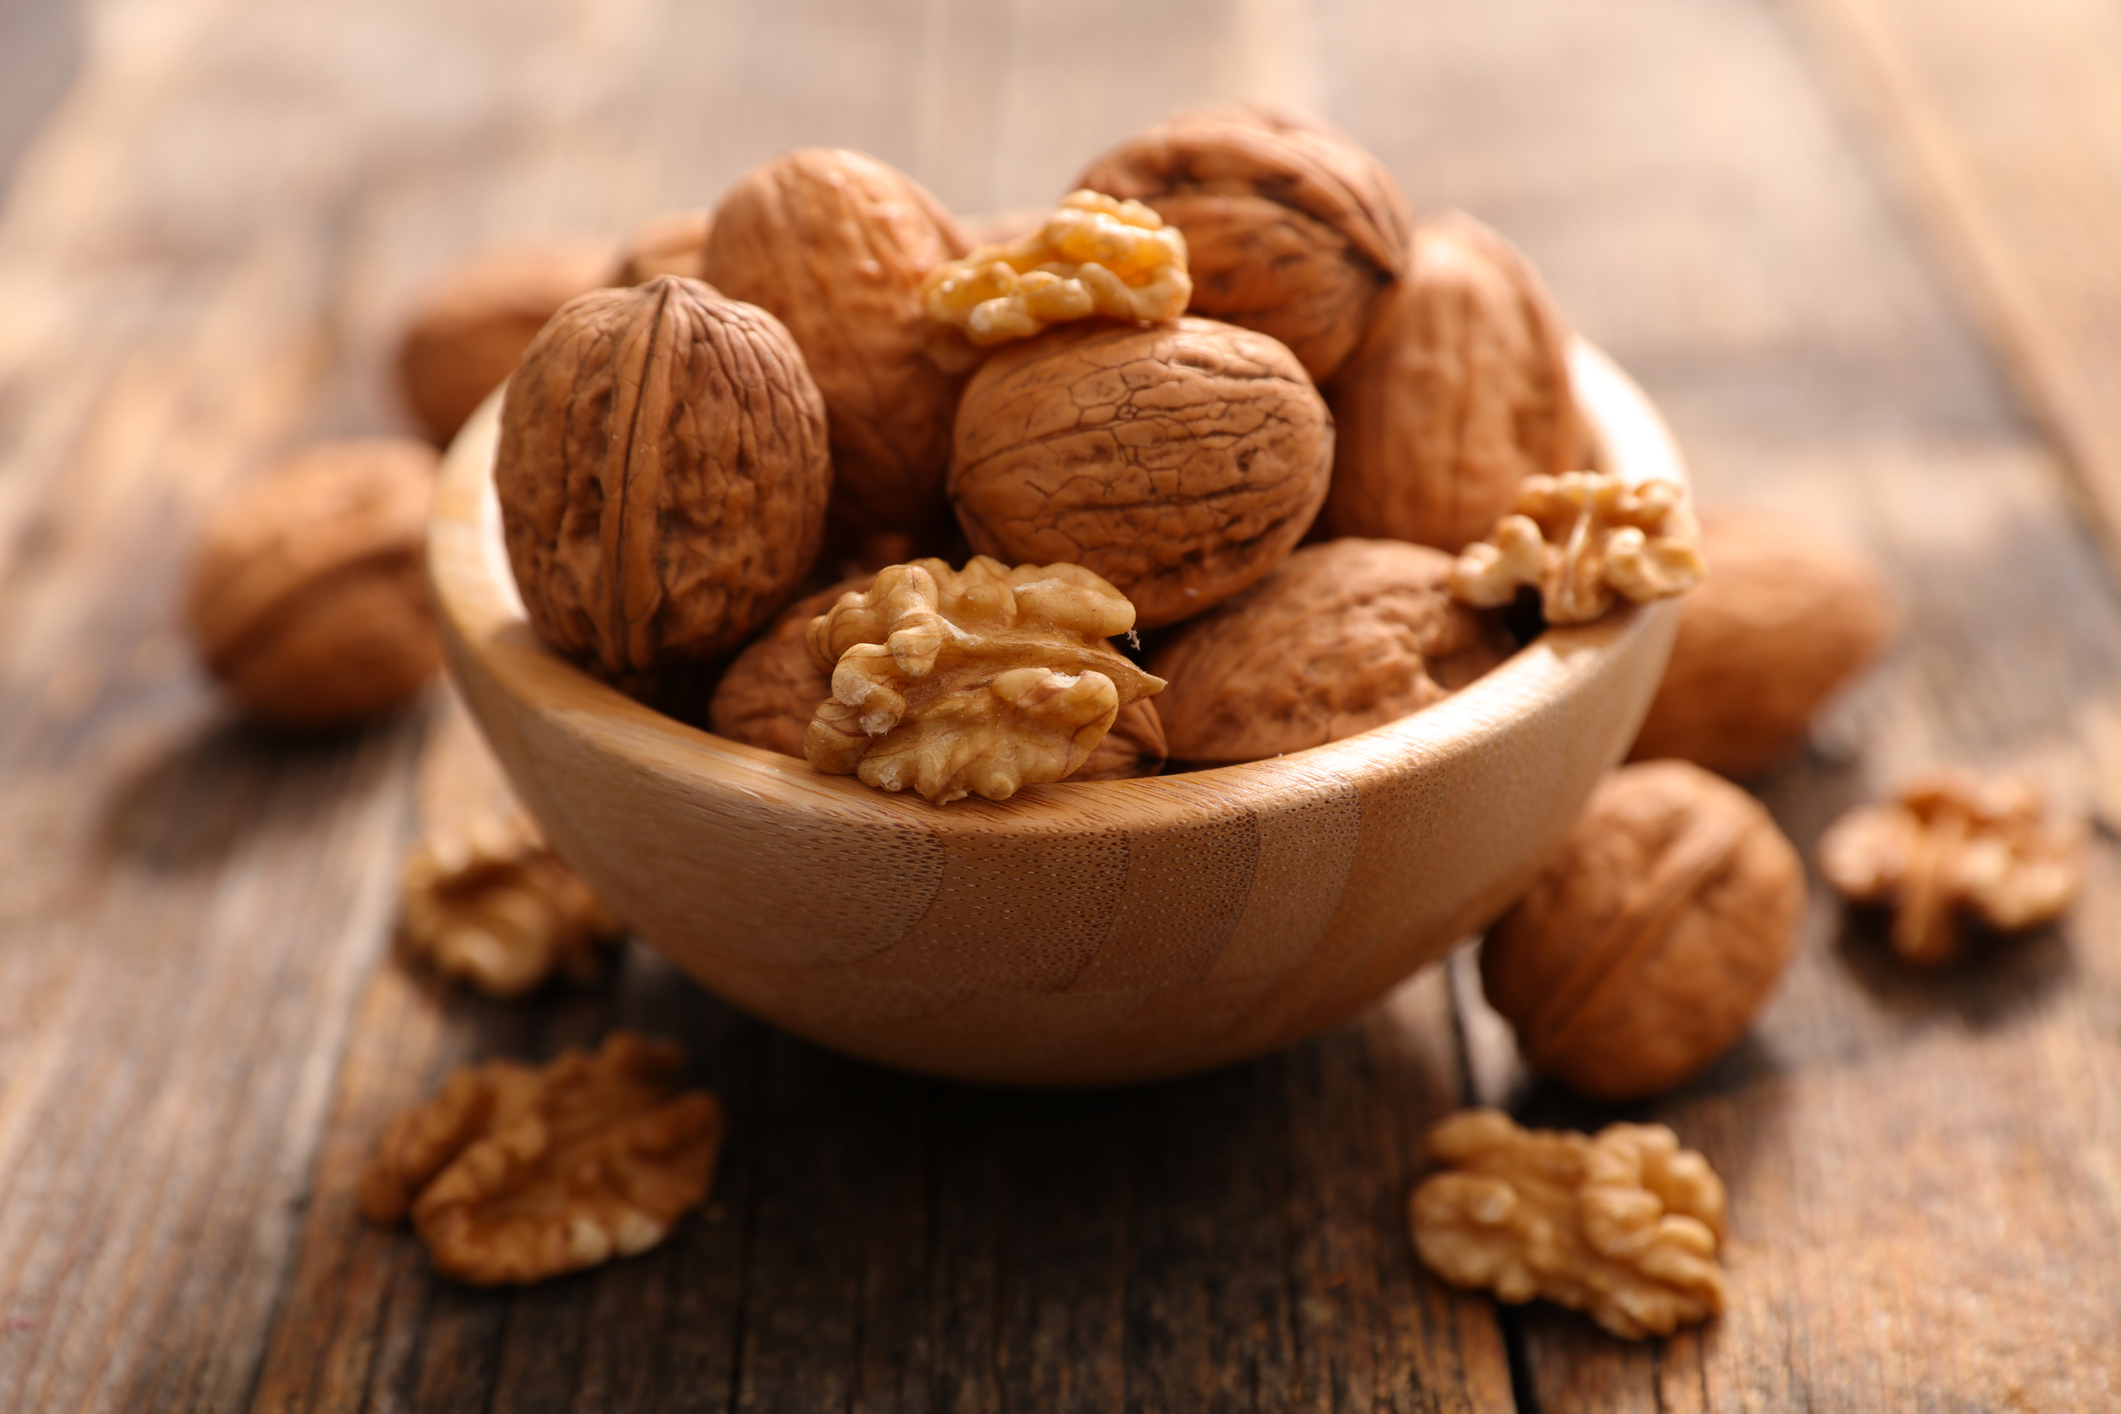 What effect do nuts have on gastrointestinal health?